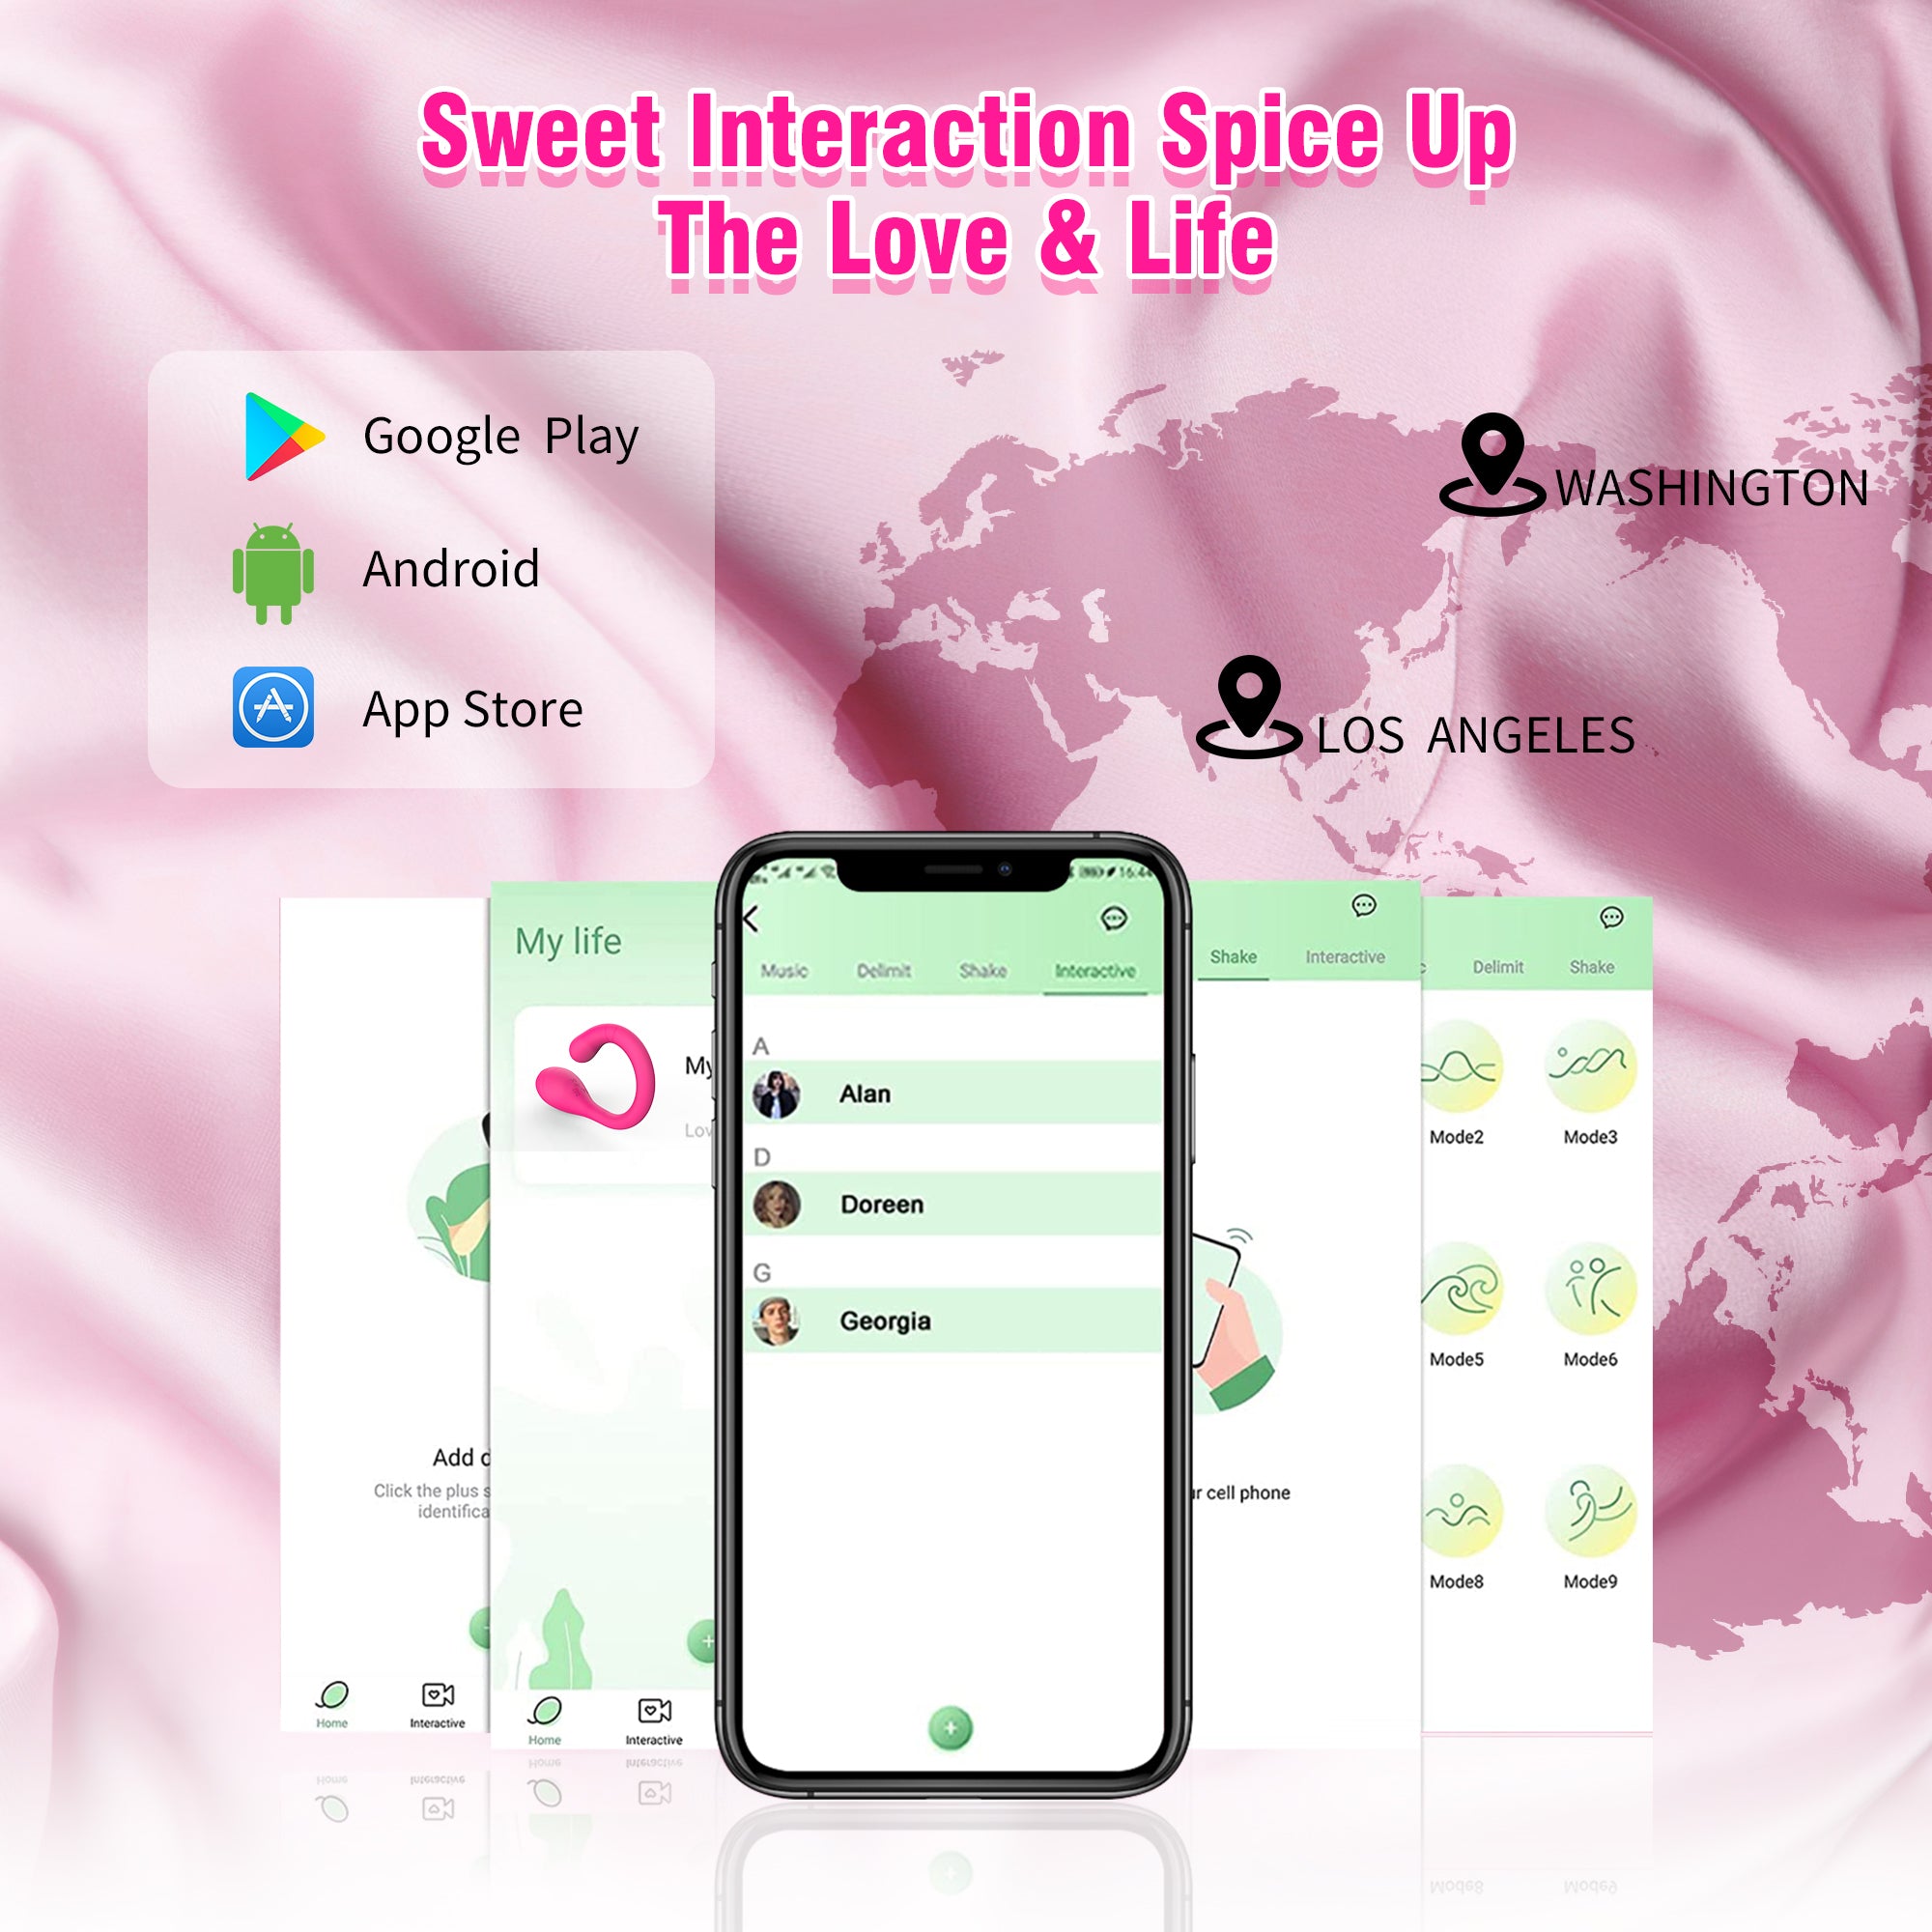 Wearable APP and Remote Control Couple Egg Vibrator